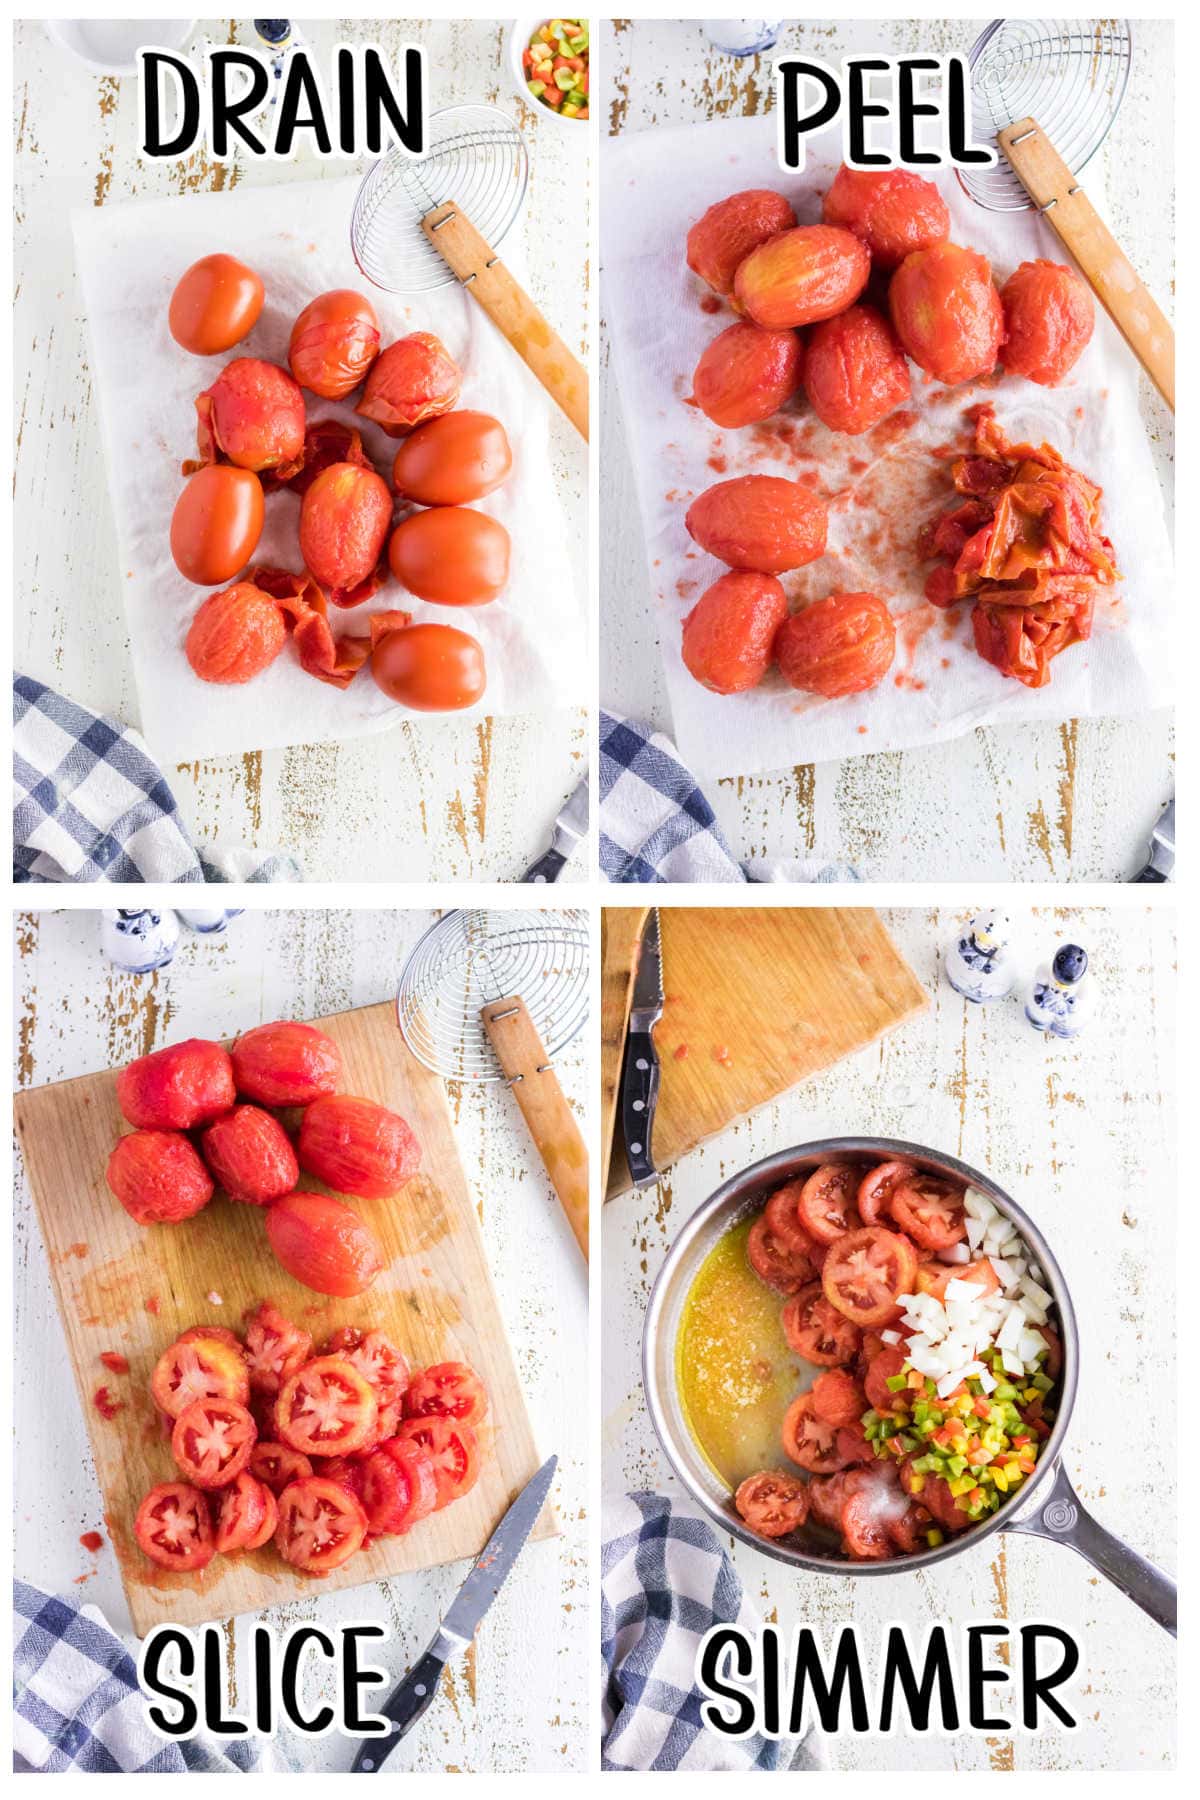 Step by step images showing how to make stewed tomatoes.